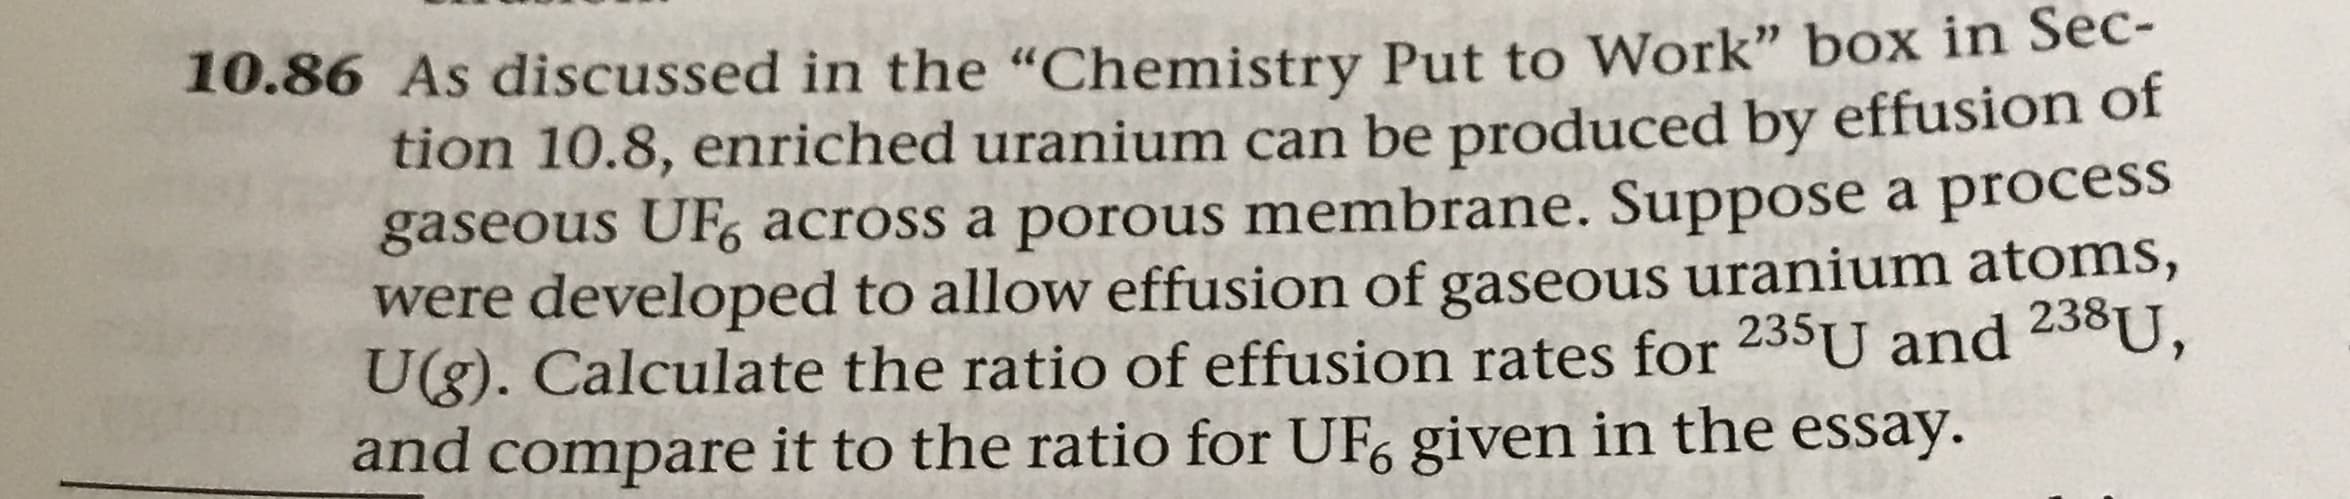 10.86 As discussed in the "Chemistry Put to Work" box in Sec-
tion 10.8, enriched uranium can be produced by effusion of
gaseous UF6 across a porous membrane. Suppose a process
were developed to allow effusion of gaseous uranium atoms,
Ug). Calculate the ratio of effusion rates for 235U and 238U,
and compare it to the ratio for UF6 given in the essay.
